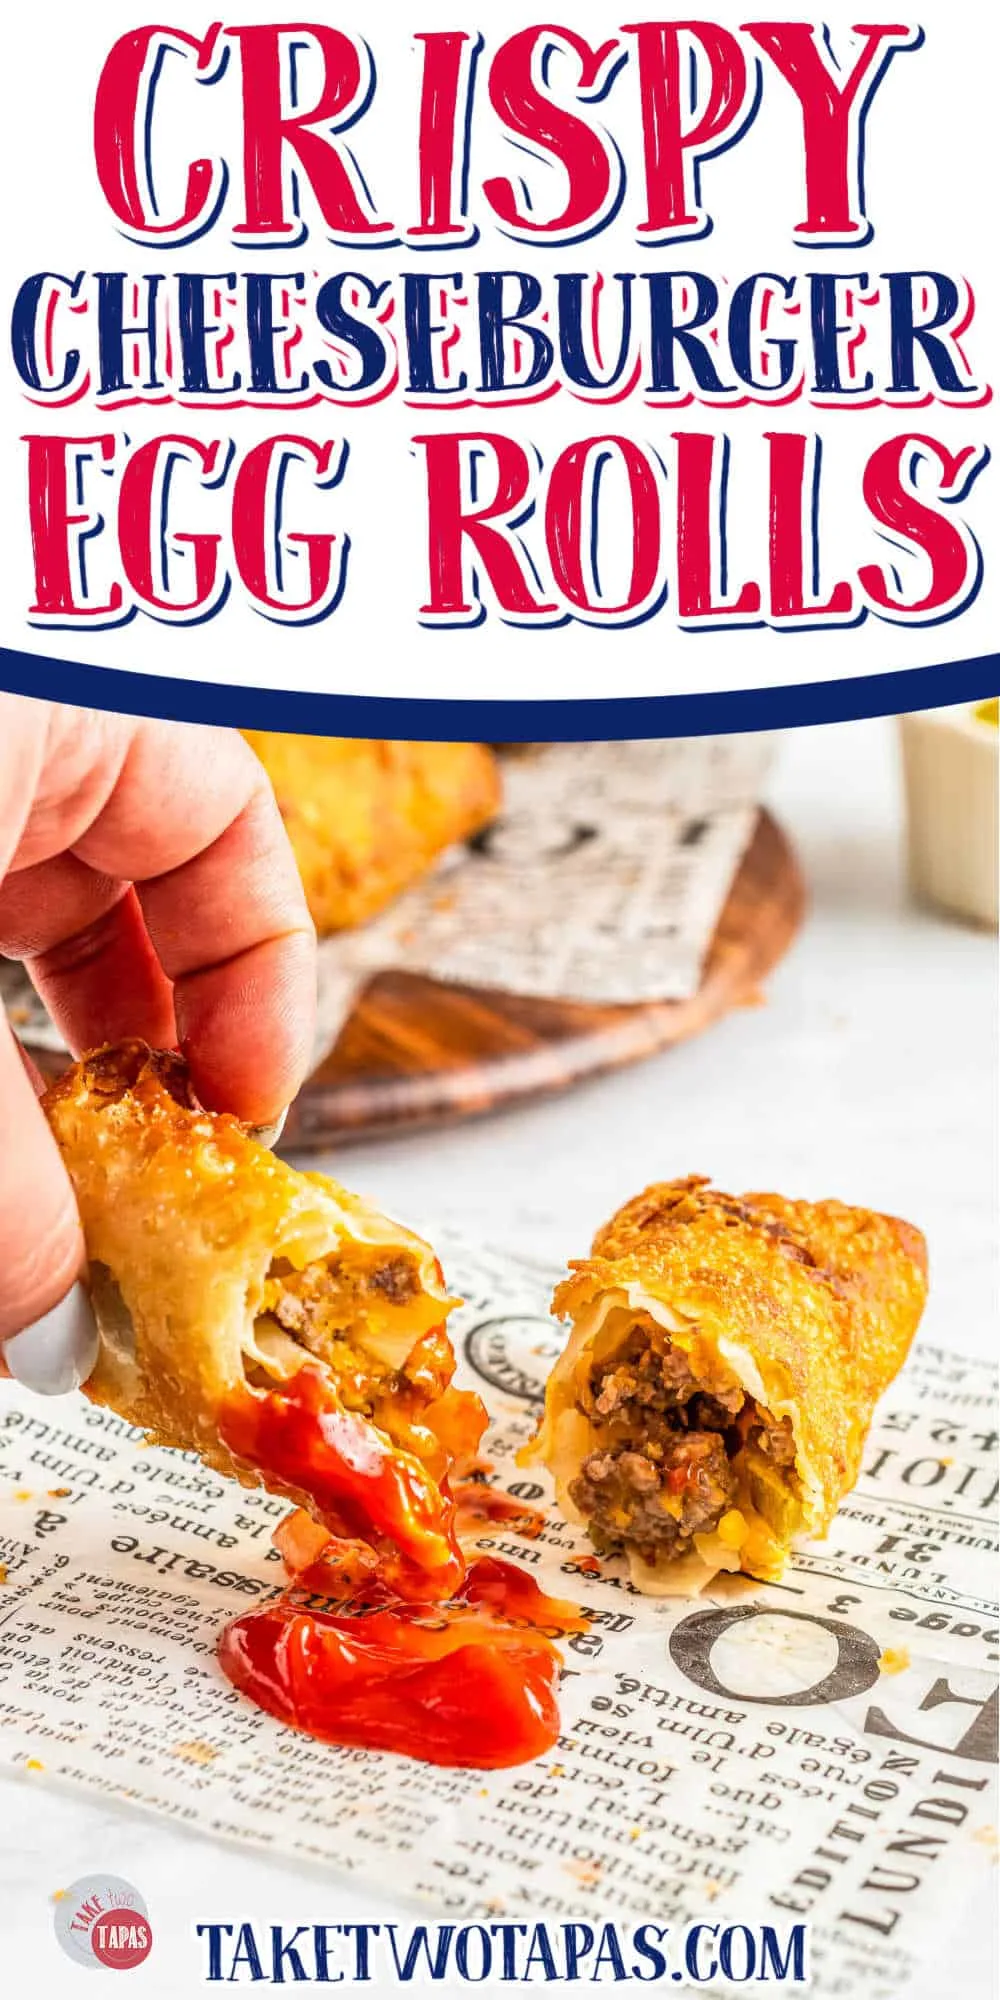 Egg rolls with minced beef and cheese filling on a white plate.